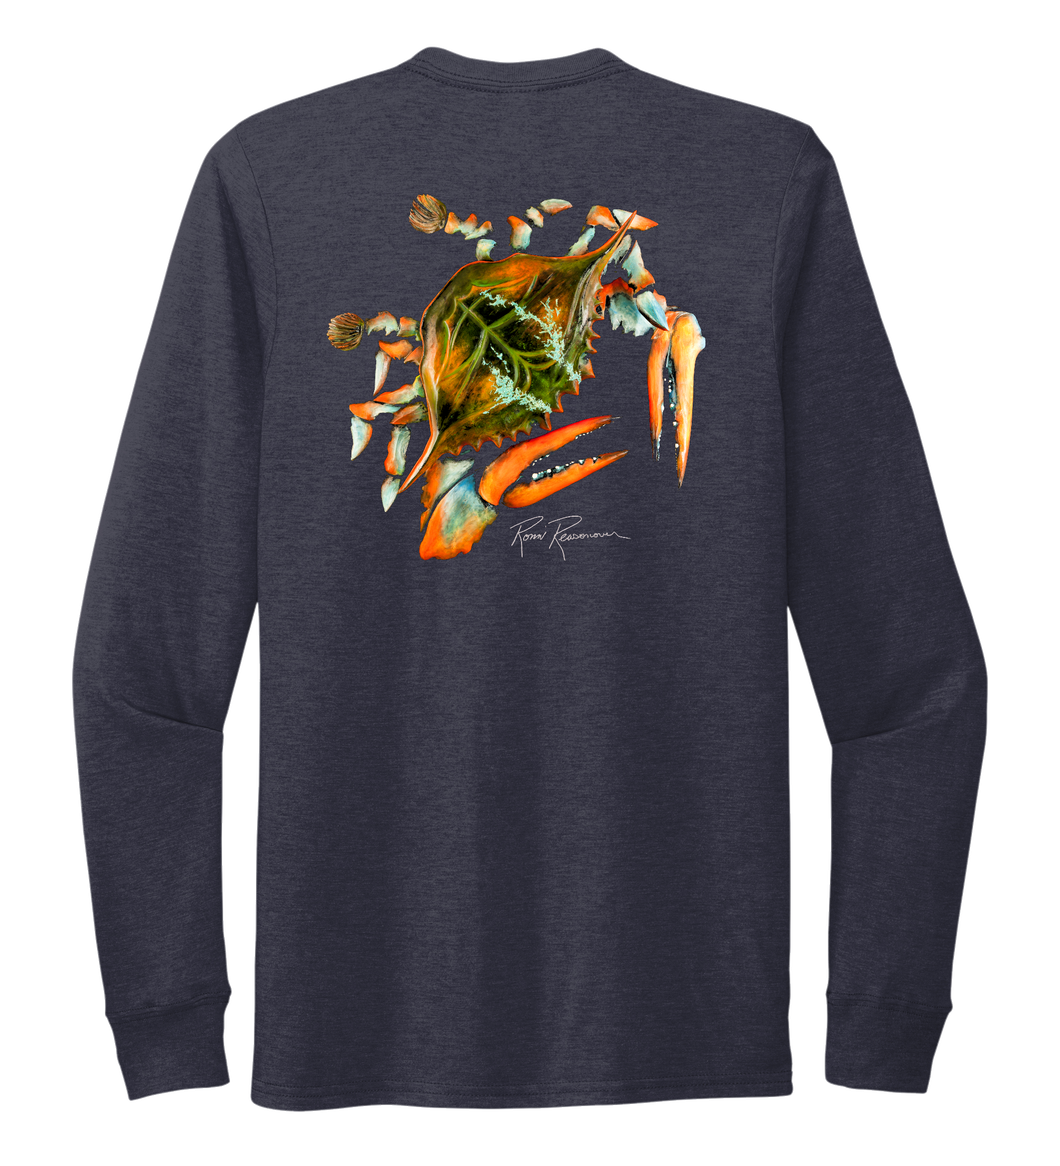 Ronnie Reasonover, The Crab, Crew Neck Long Sleeve T-Shirt in Deep Sea Blue